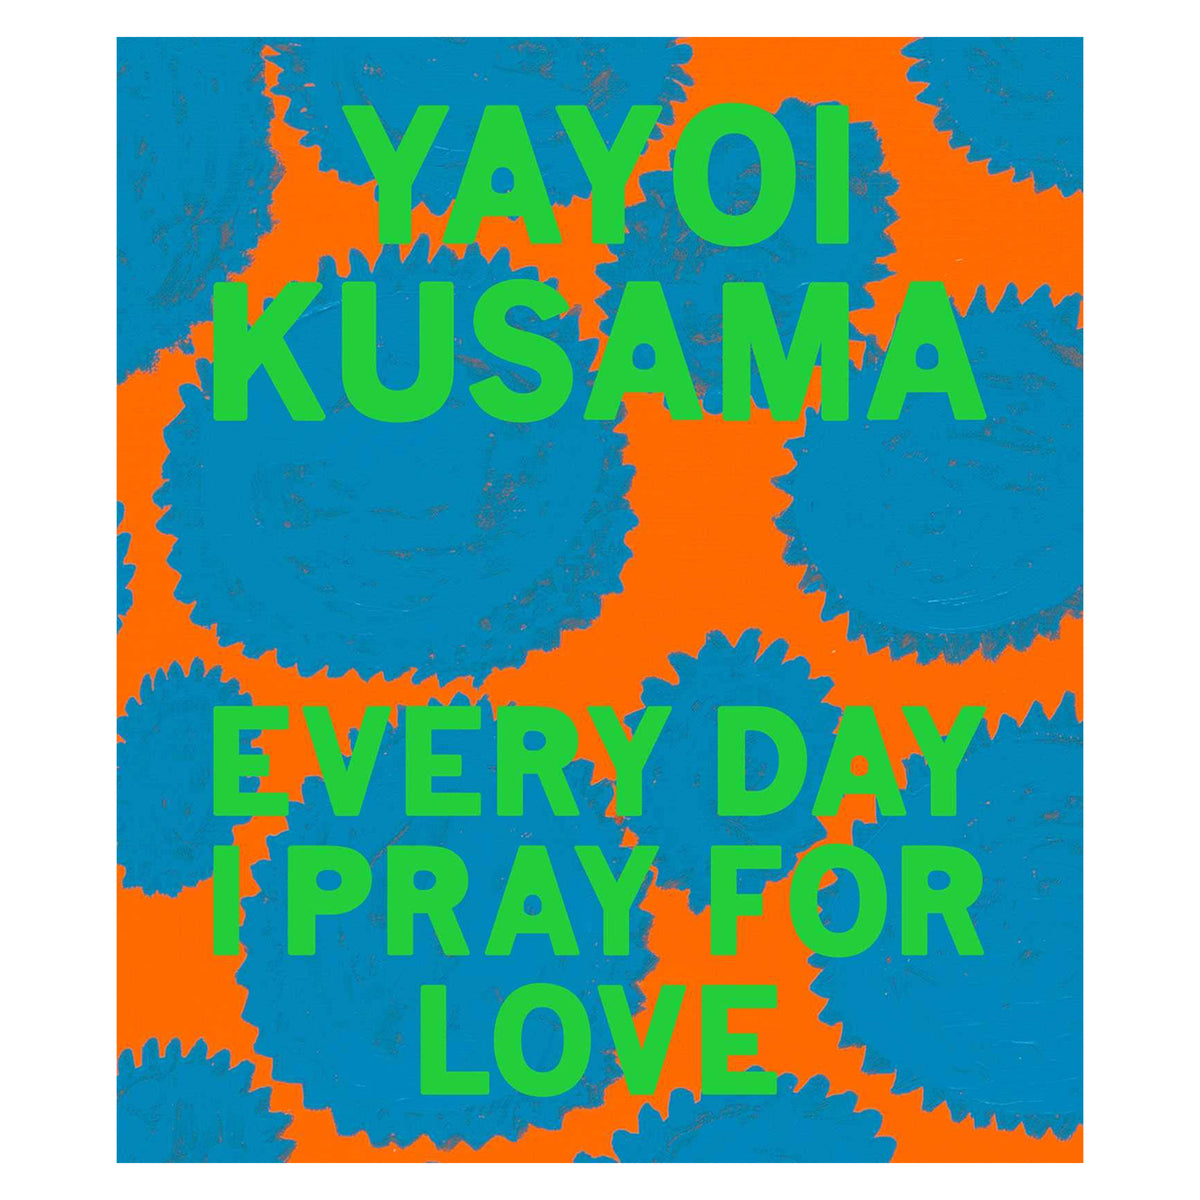 Yayoi Kusama: Every Day I Pray For Love&#39;s front cover.